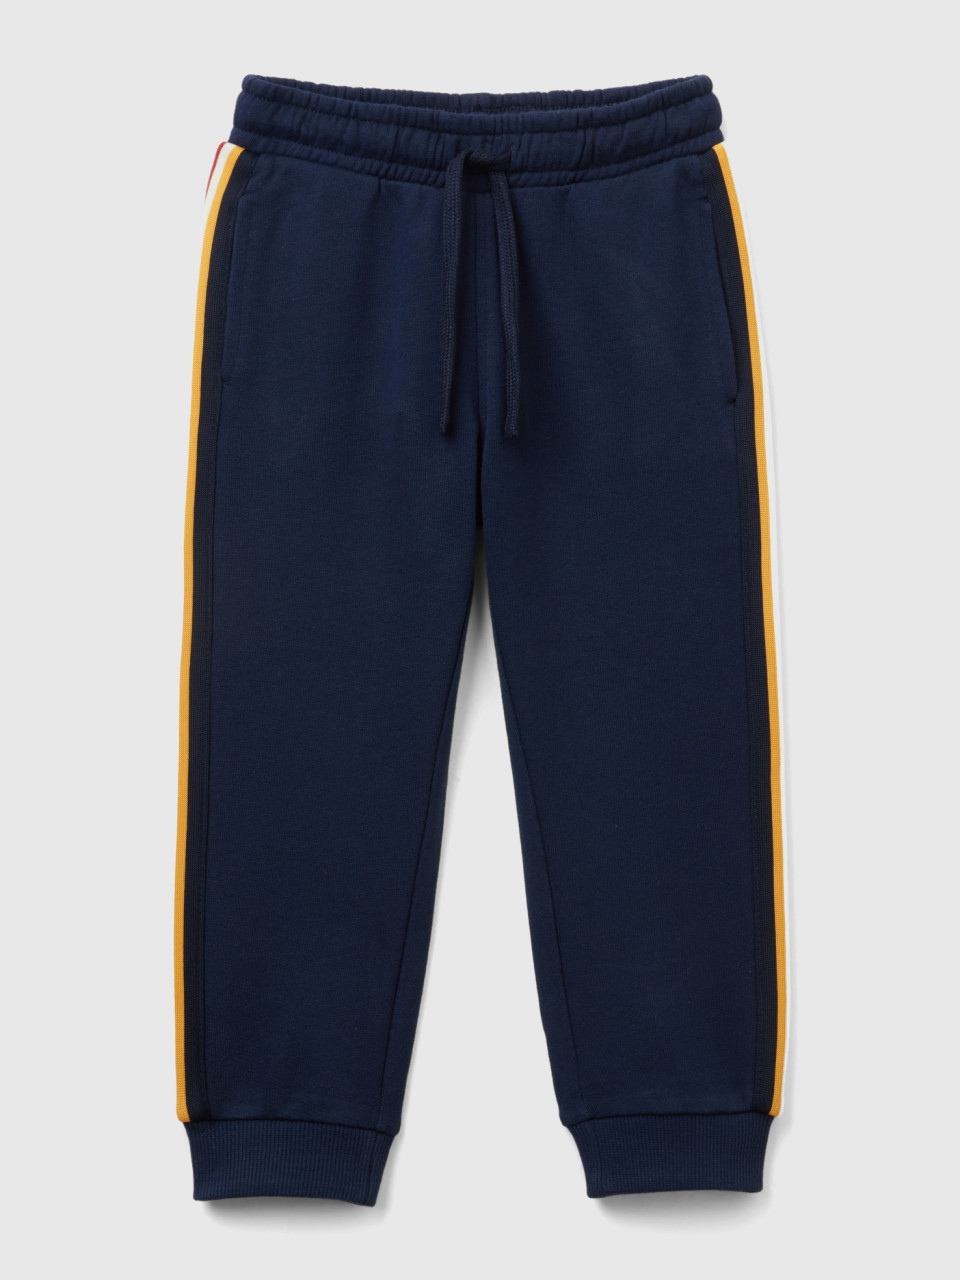 Benetton, Sweat Joggers With Bands, Dark Blue, Kids